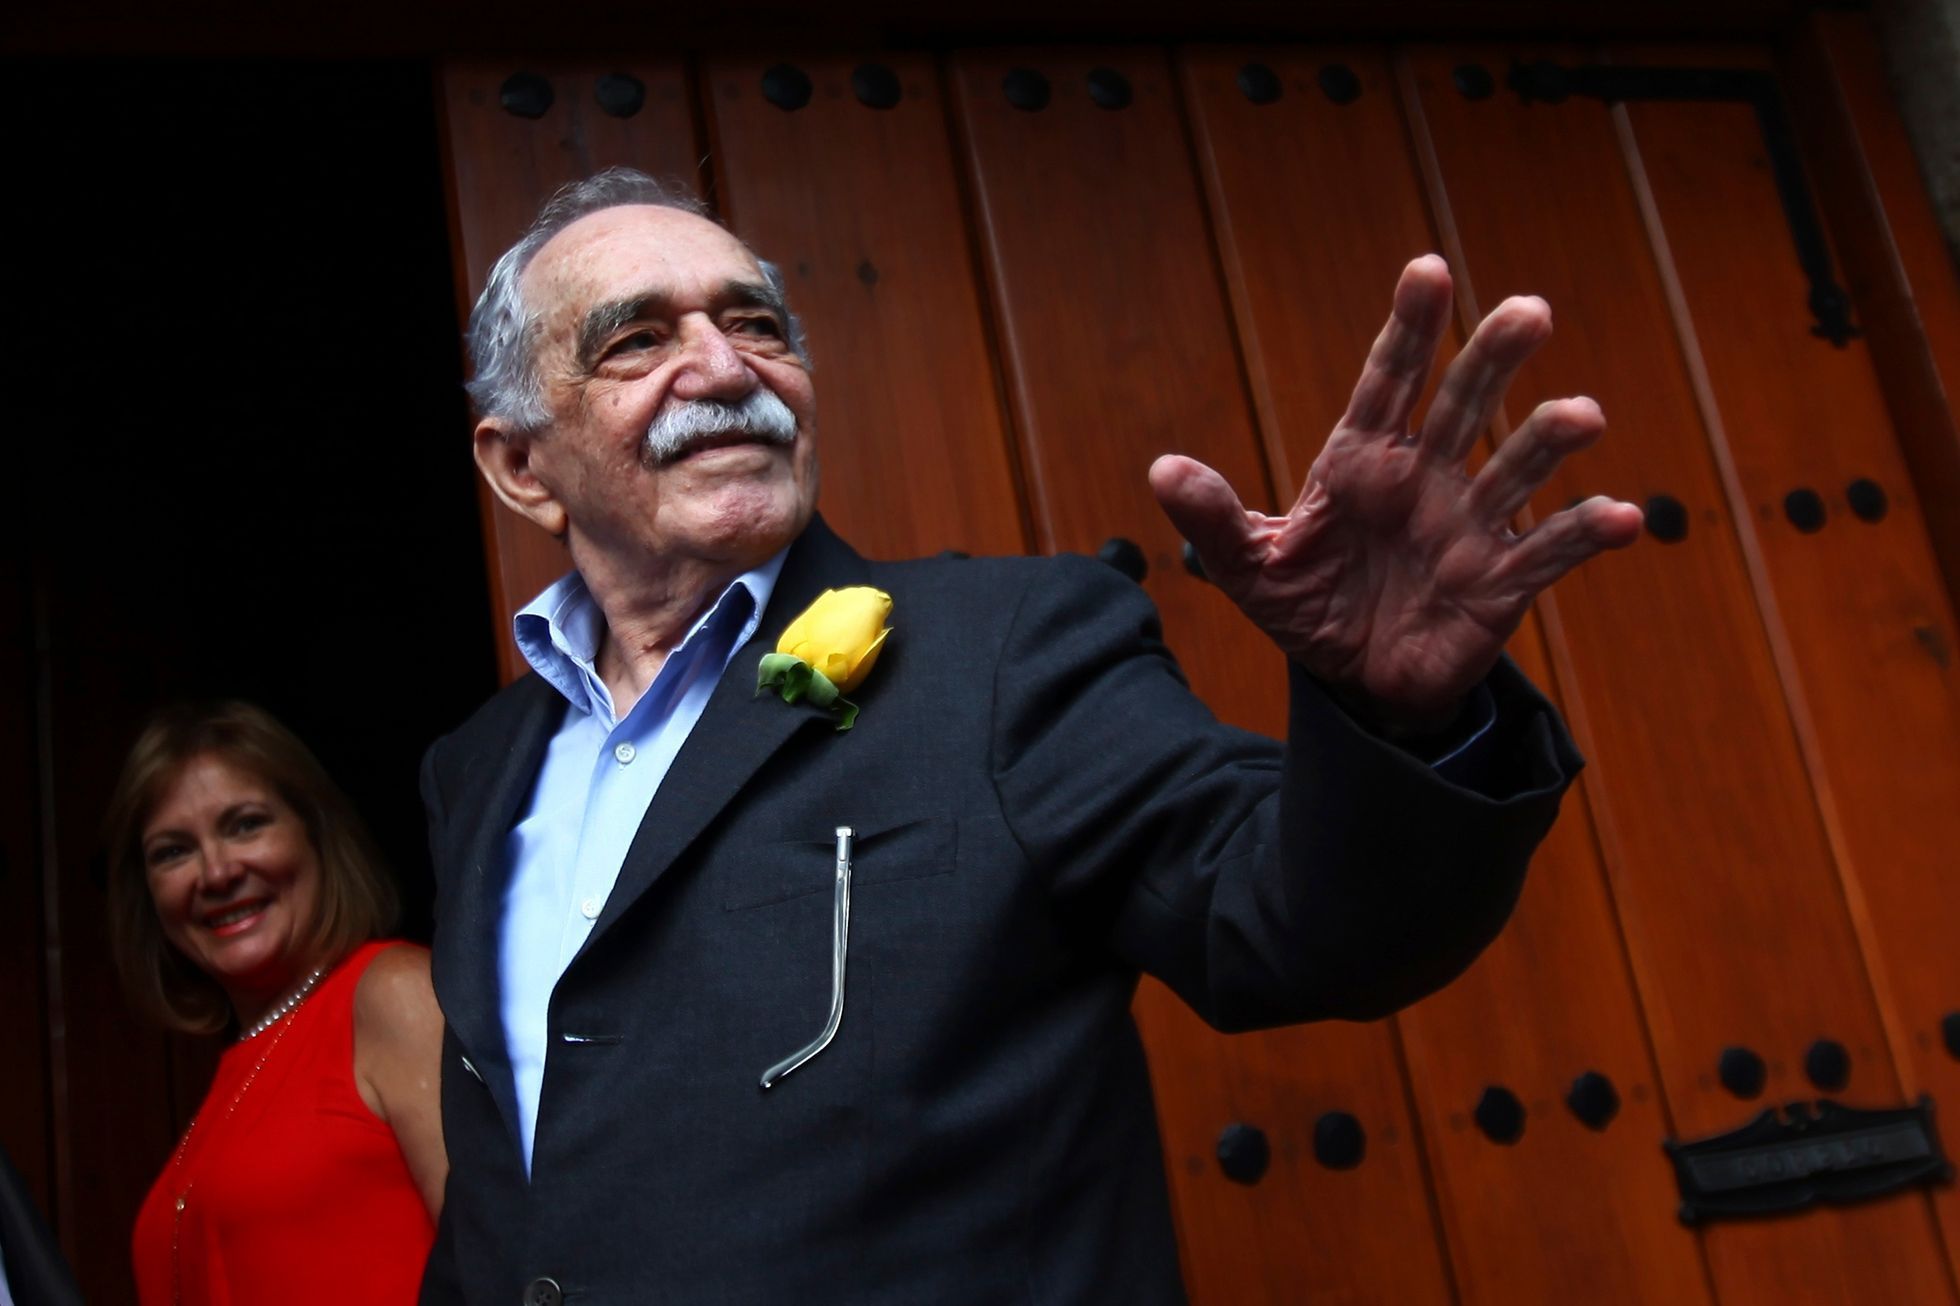 Gabriel Garcia Marquez greets journalists and neighbours on his birthday outside his house in Mexico City